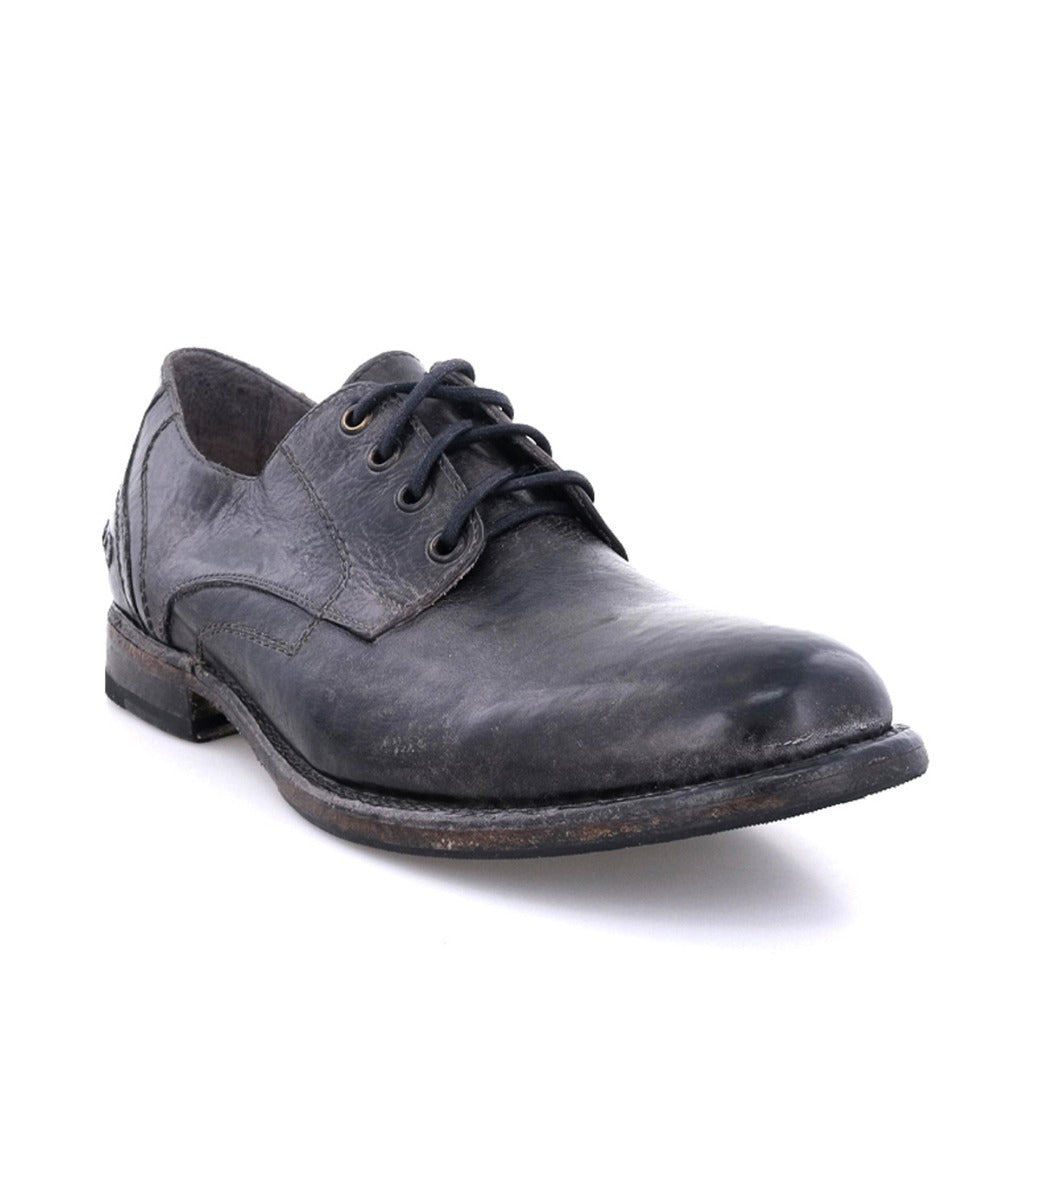 A men's Bed Stu Galao grey leather oxford shoe on a white background.